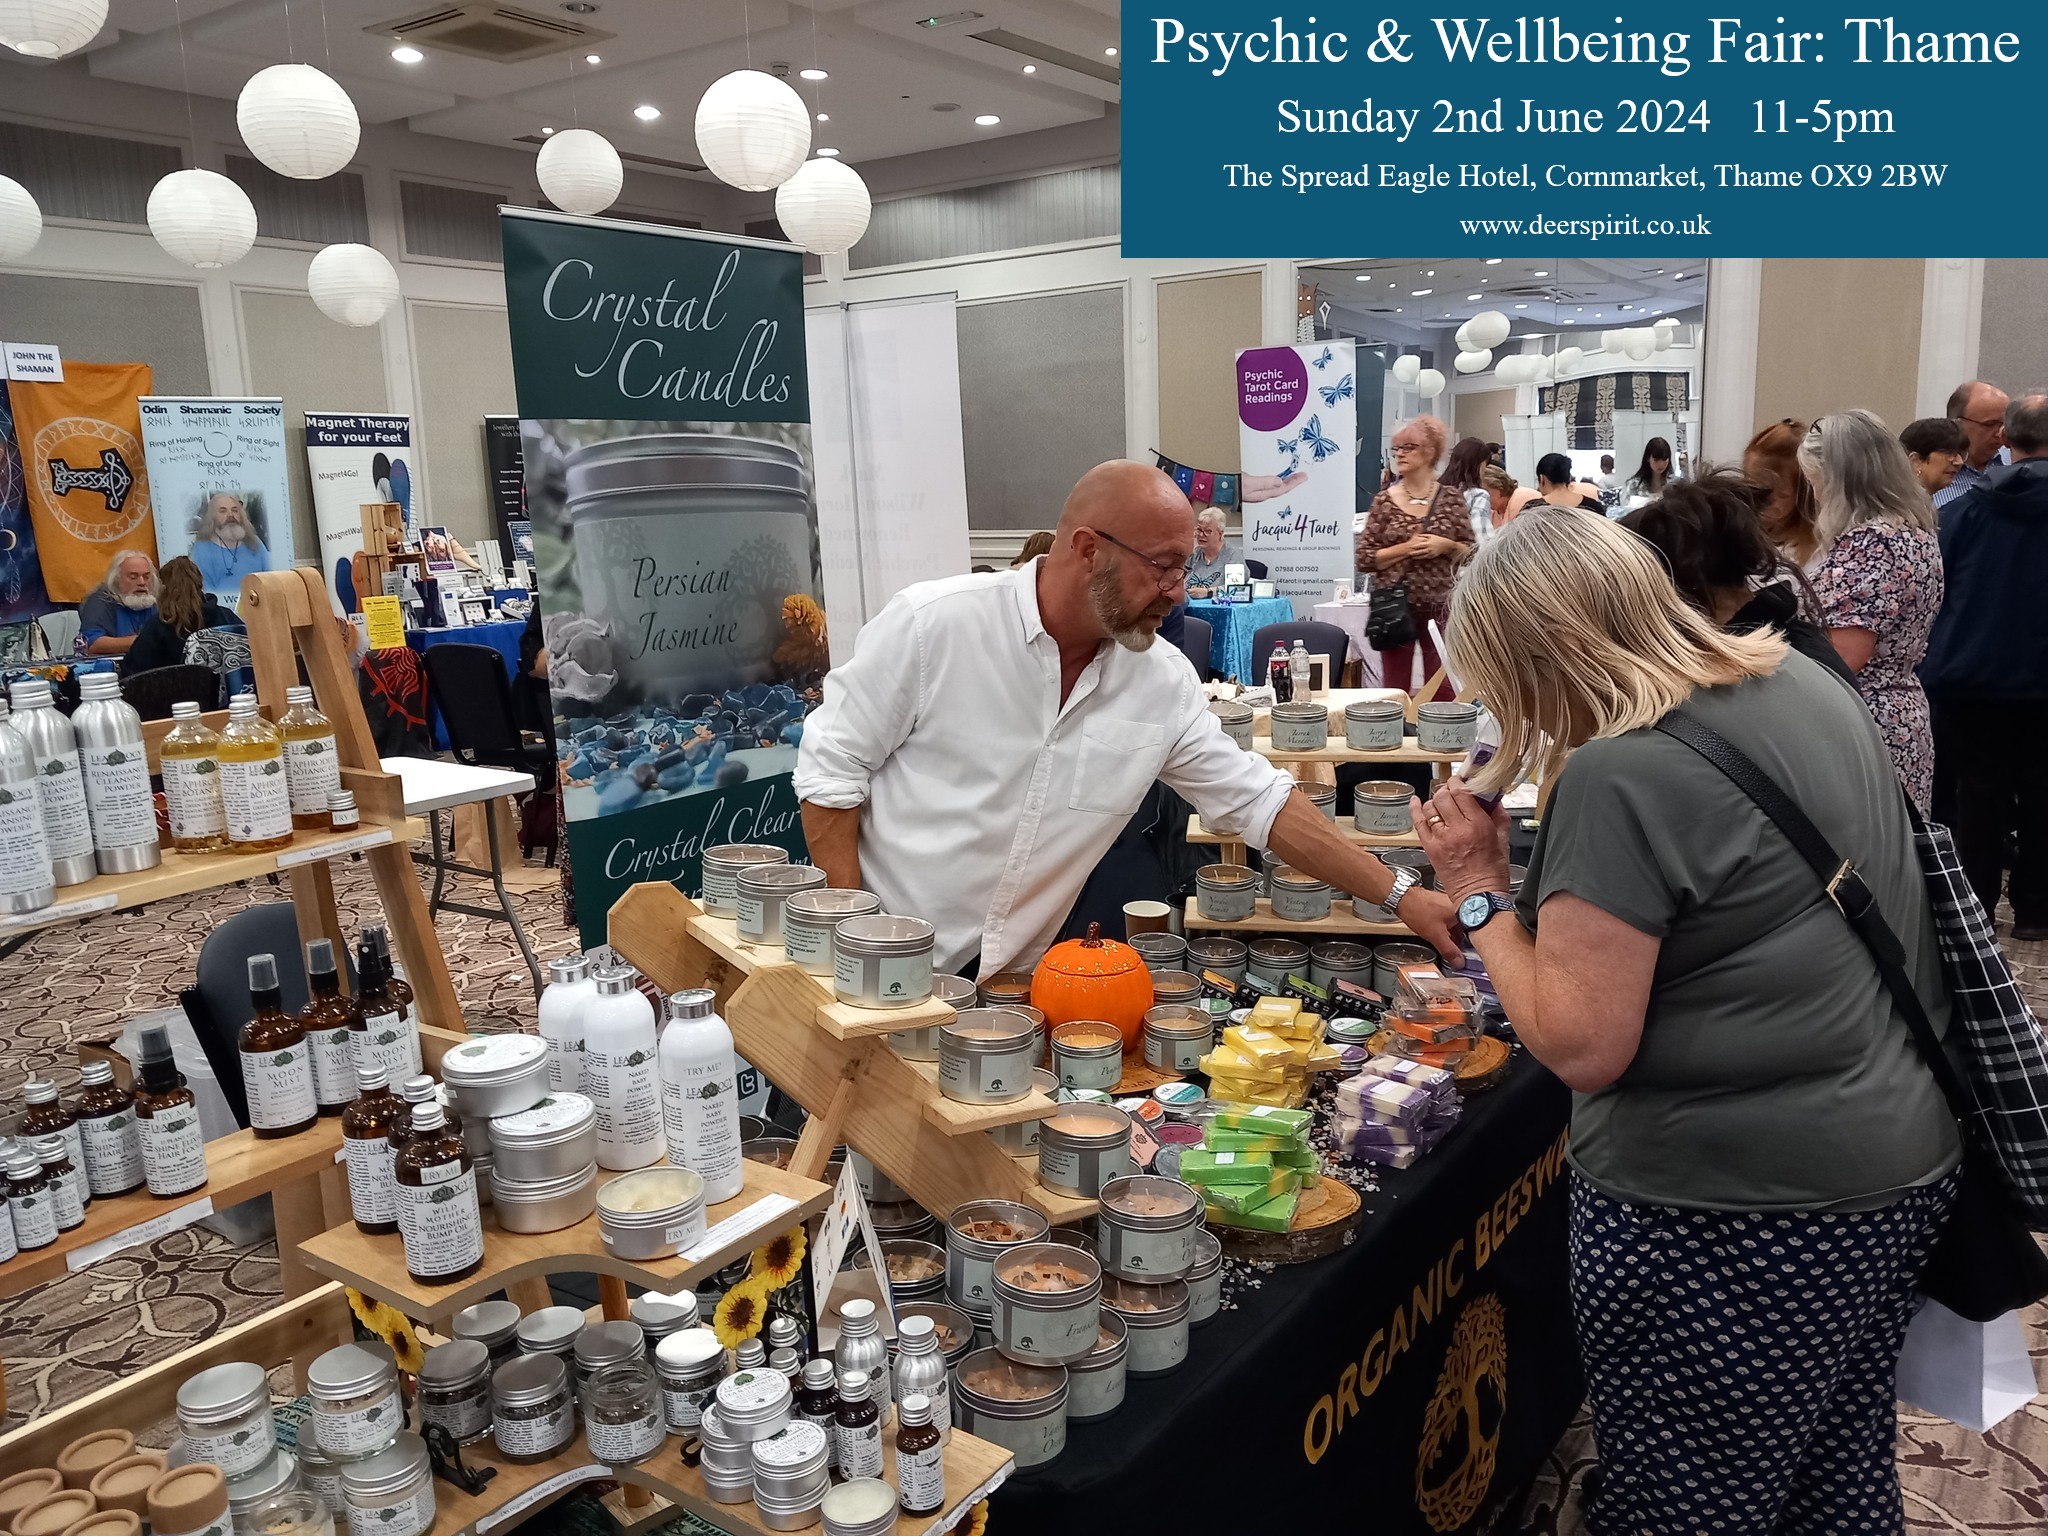 Thame's Summer Psychic & Wellbeing Fair